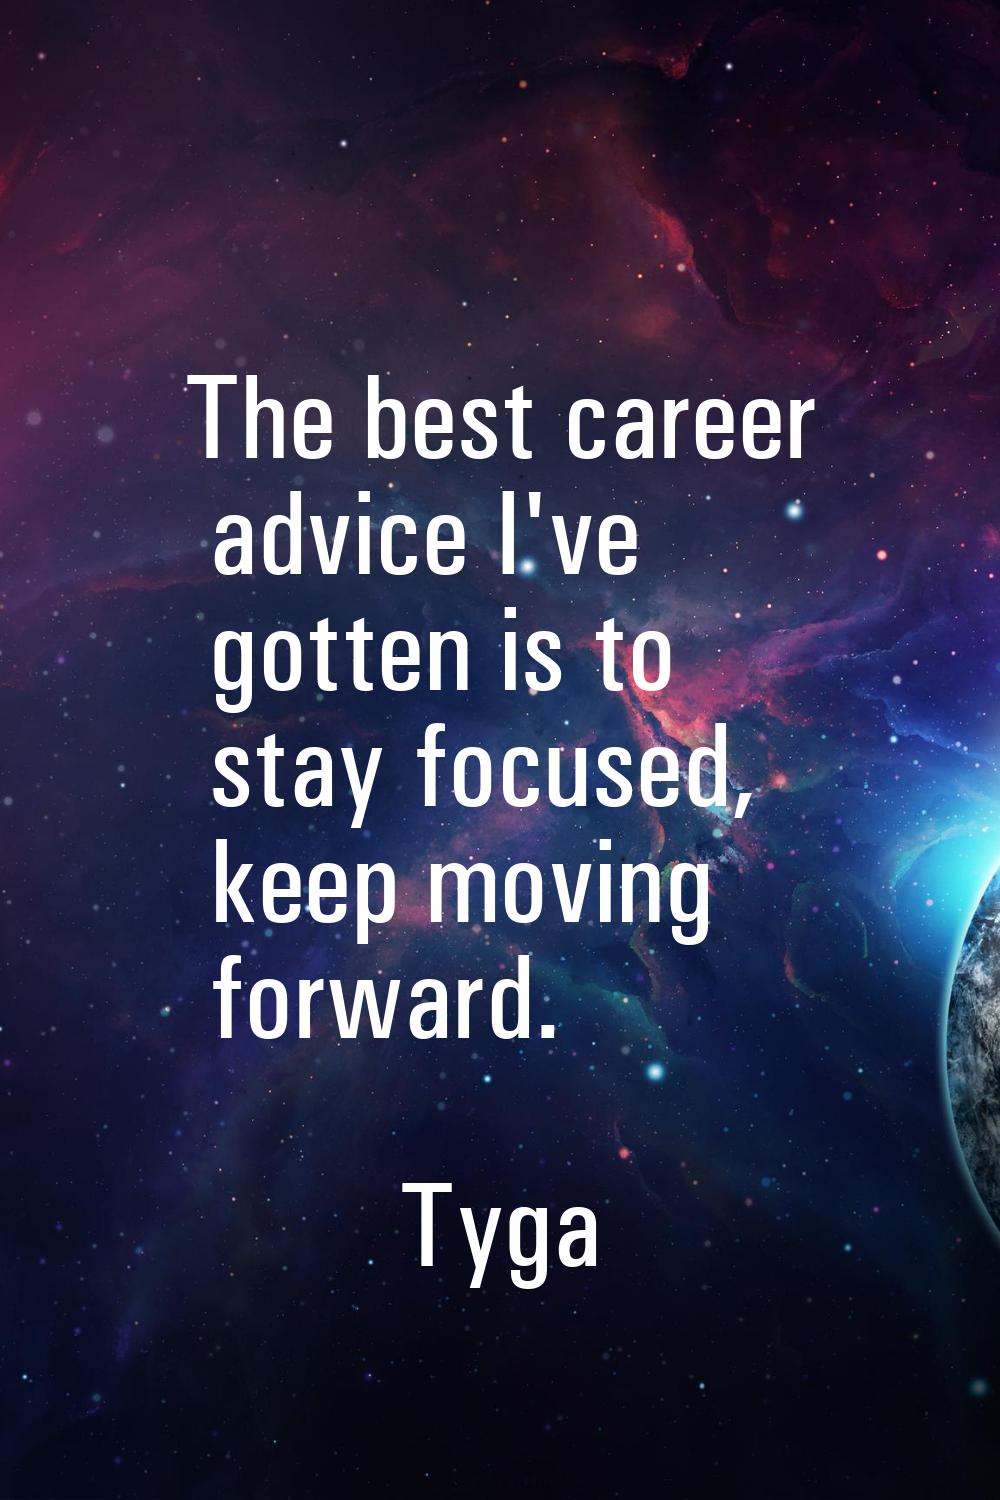 The best career advice I've gotten is to stay focused, keep moving forward.